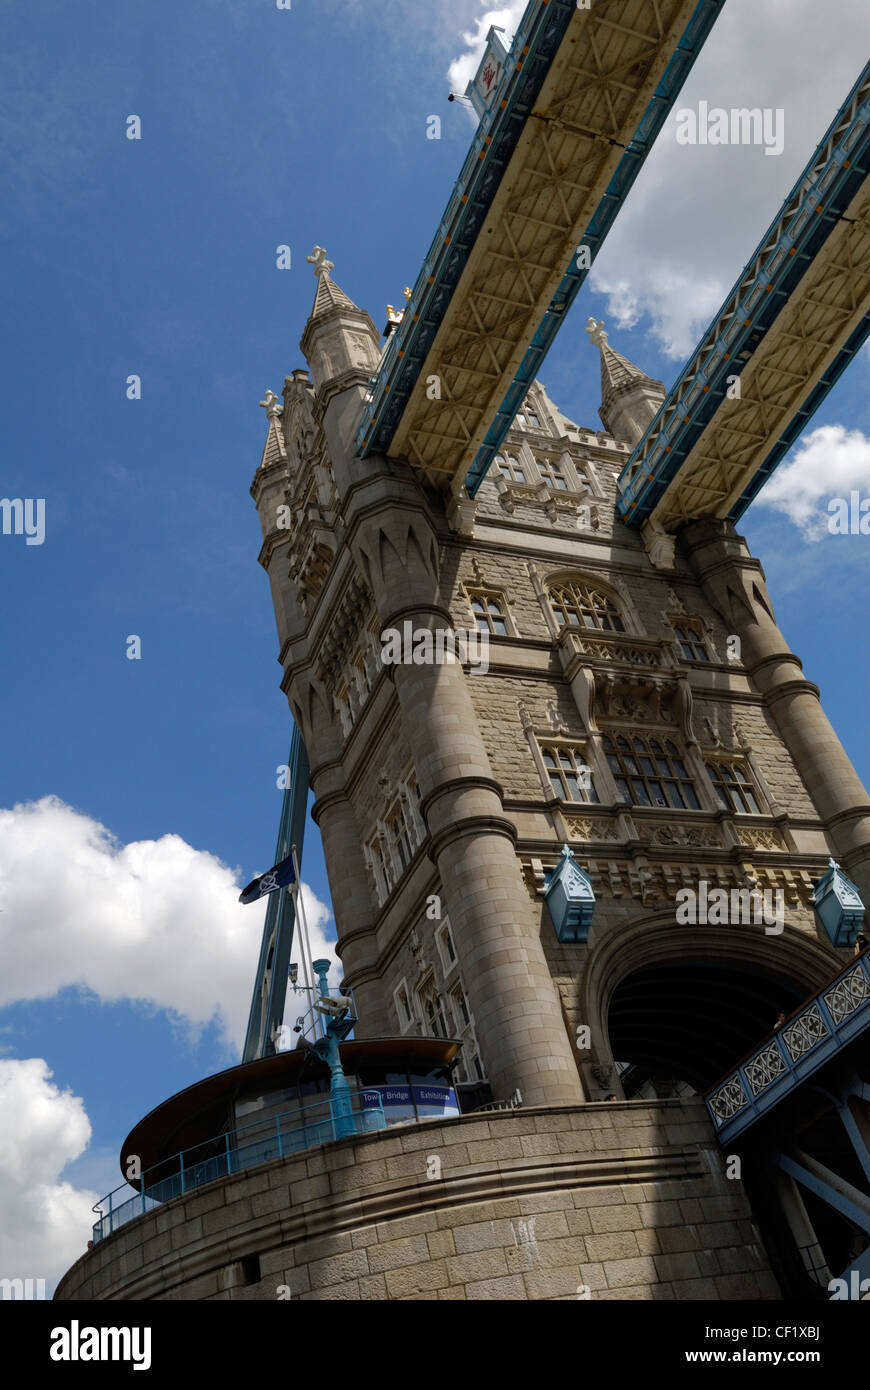 Looking up at one of the towers of Tower Bridge, one of London's most iconic landmarks. Stock Photo